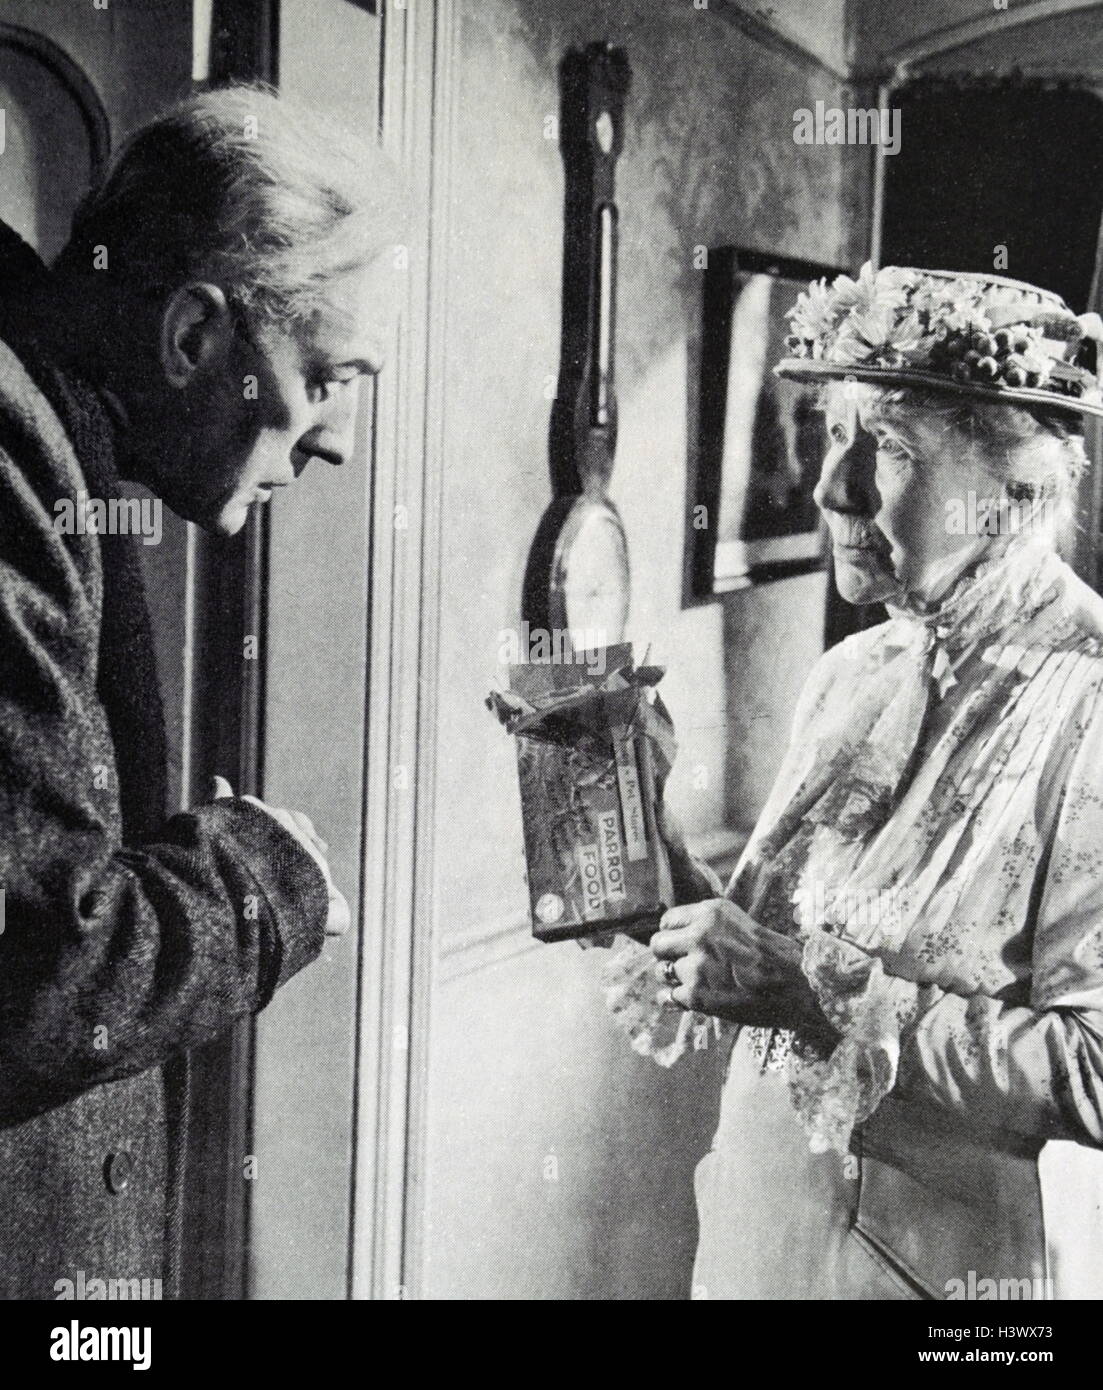 Film still from 'The Ladykillers' starring Katie Johnson (1878-1957) and Alec Guinness (1914-2000). Dated 20th Century Stock Photo